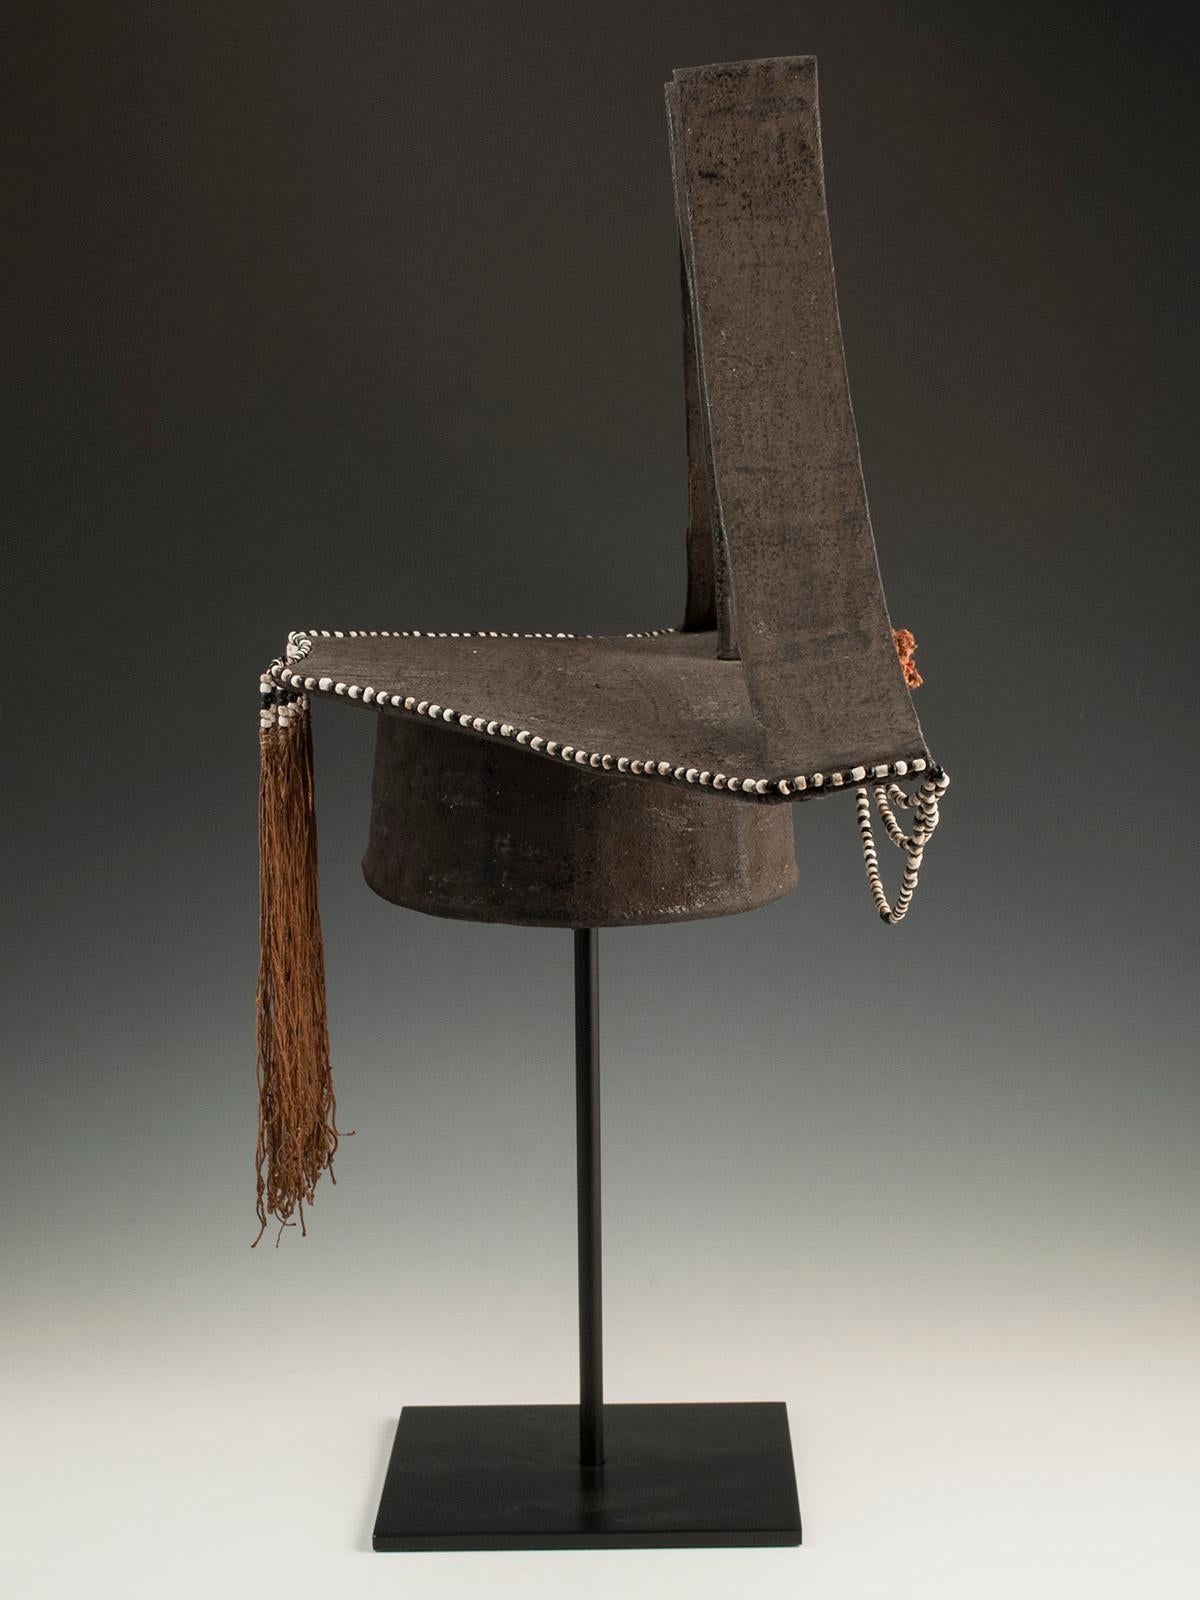 Rare early-mid-20th century tribal woman's wedding hat, China.

This is an unusual woman's wedding hat with dramatic upswept peaked elements from the Pan/Yao people, Kontszyan District, Guizhou Province, China. An orange silk pompom anchors three